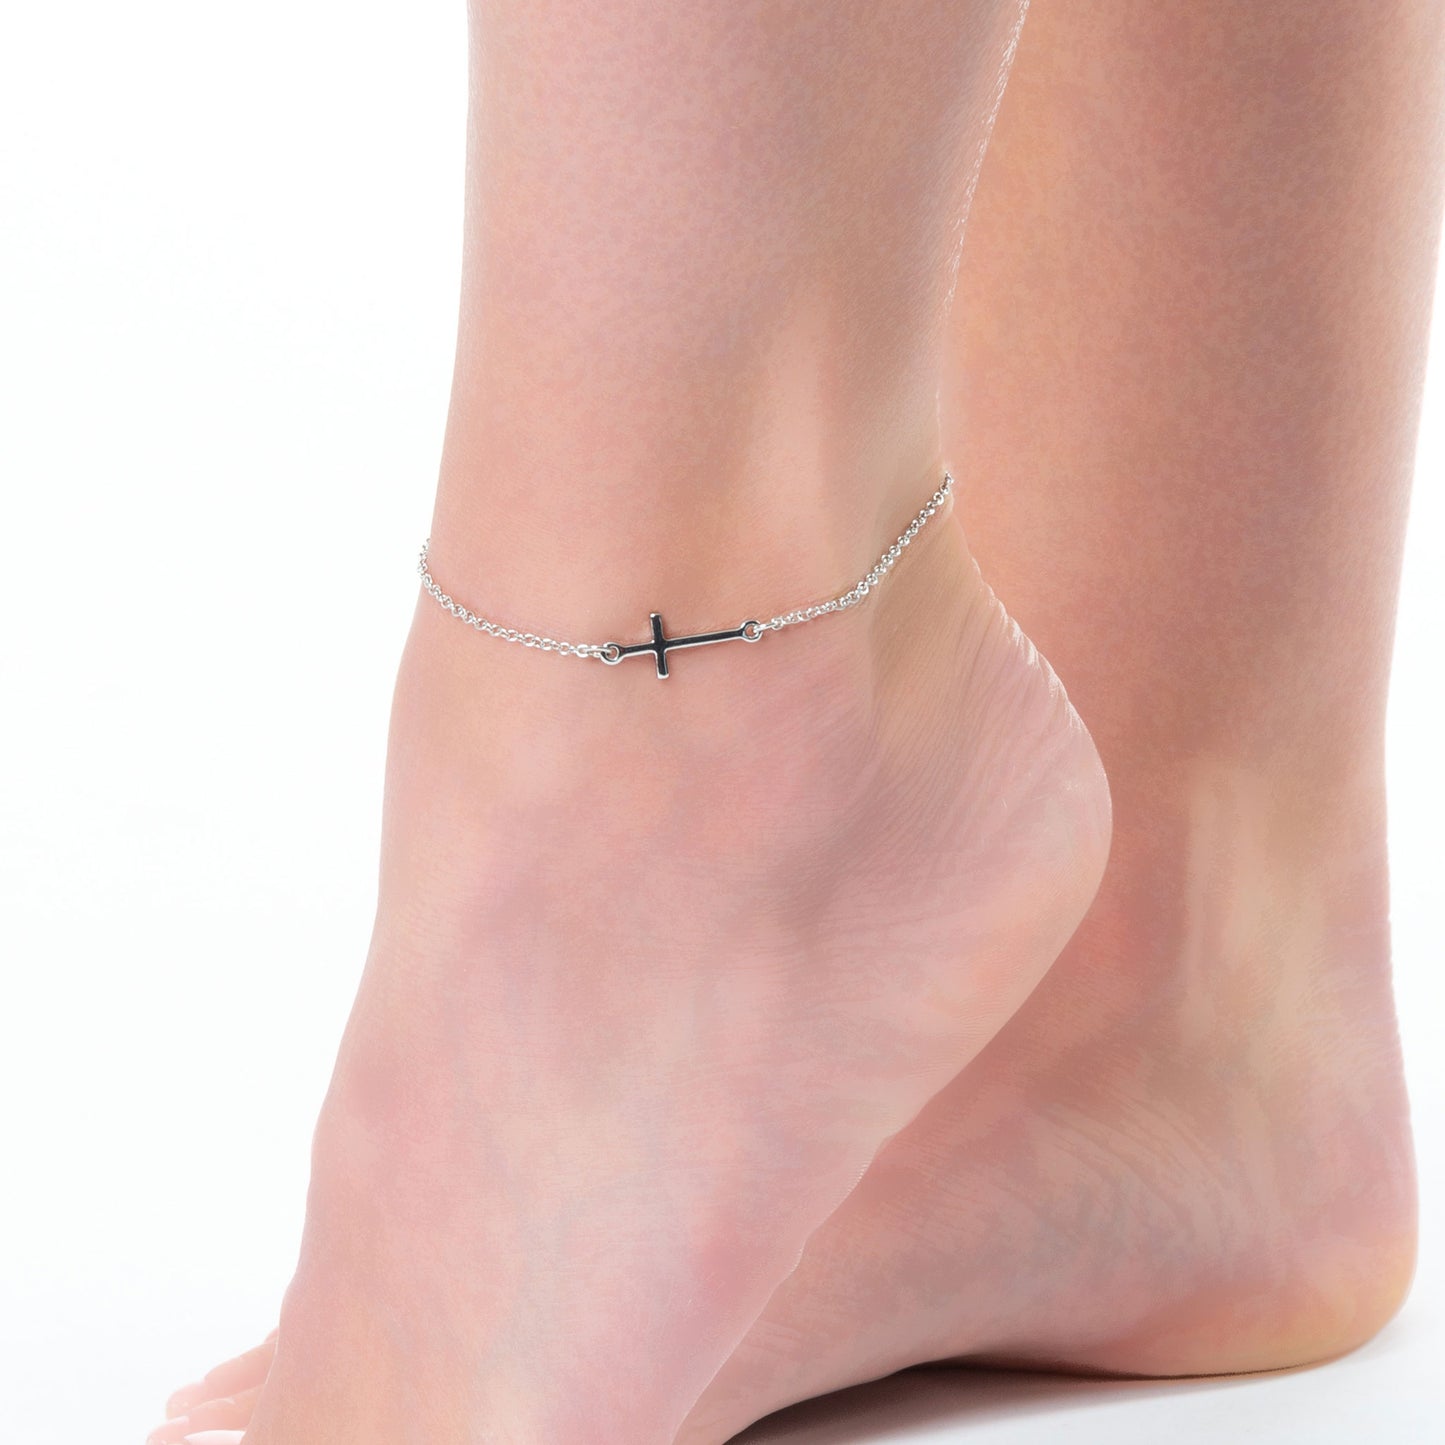 Alexis Cross Charm Anklet